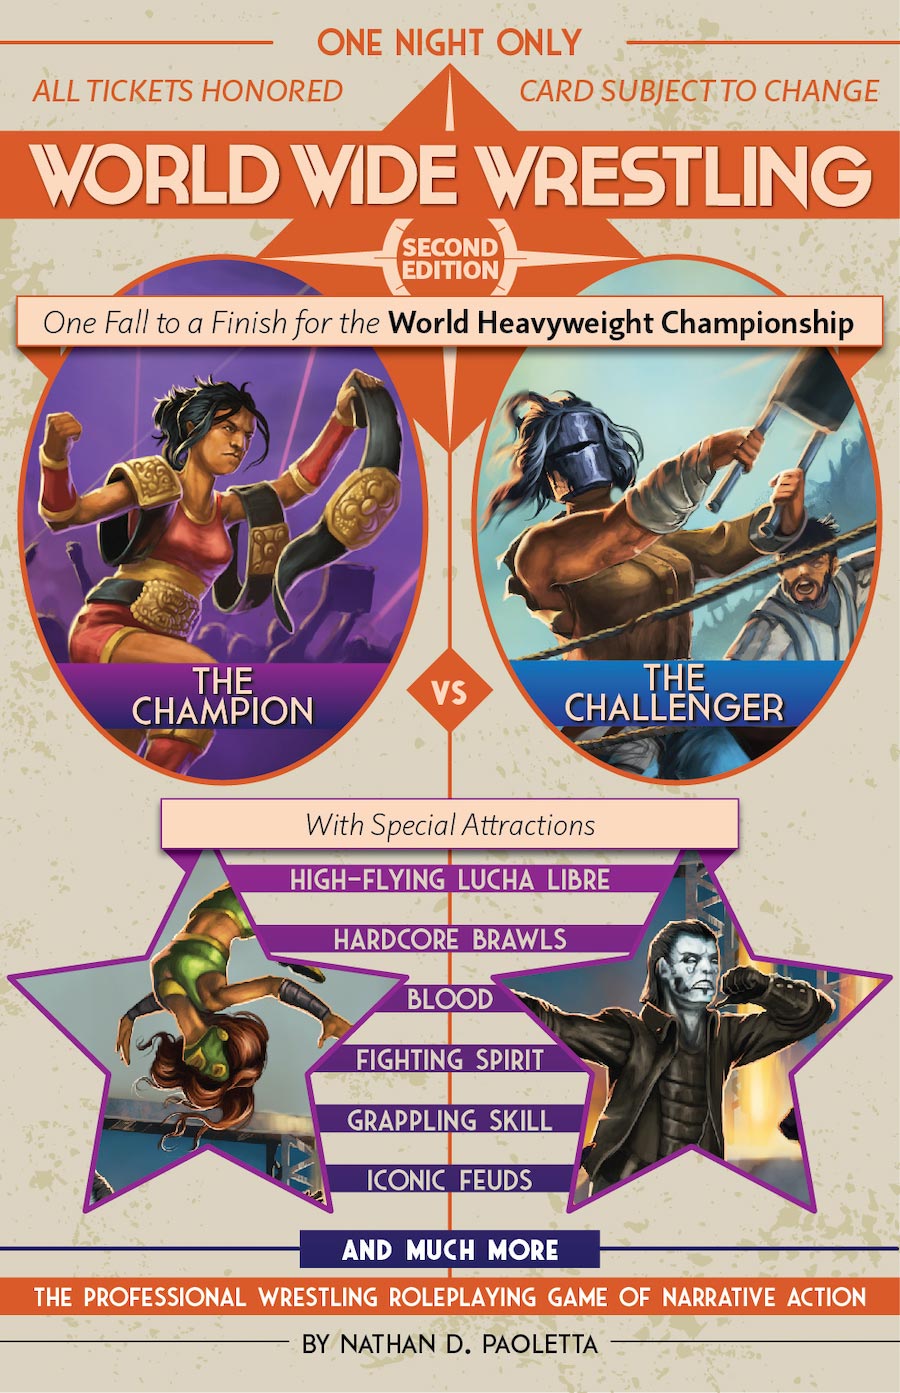 World Wide Wrestling: Second Edition - Bards & Cards